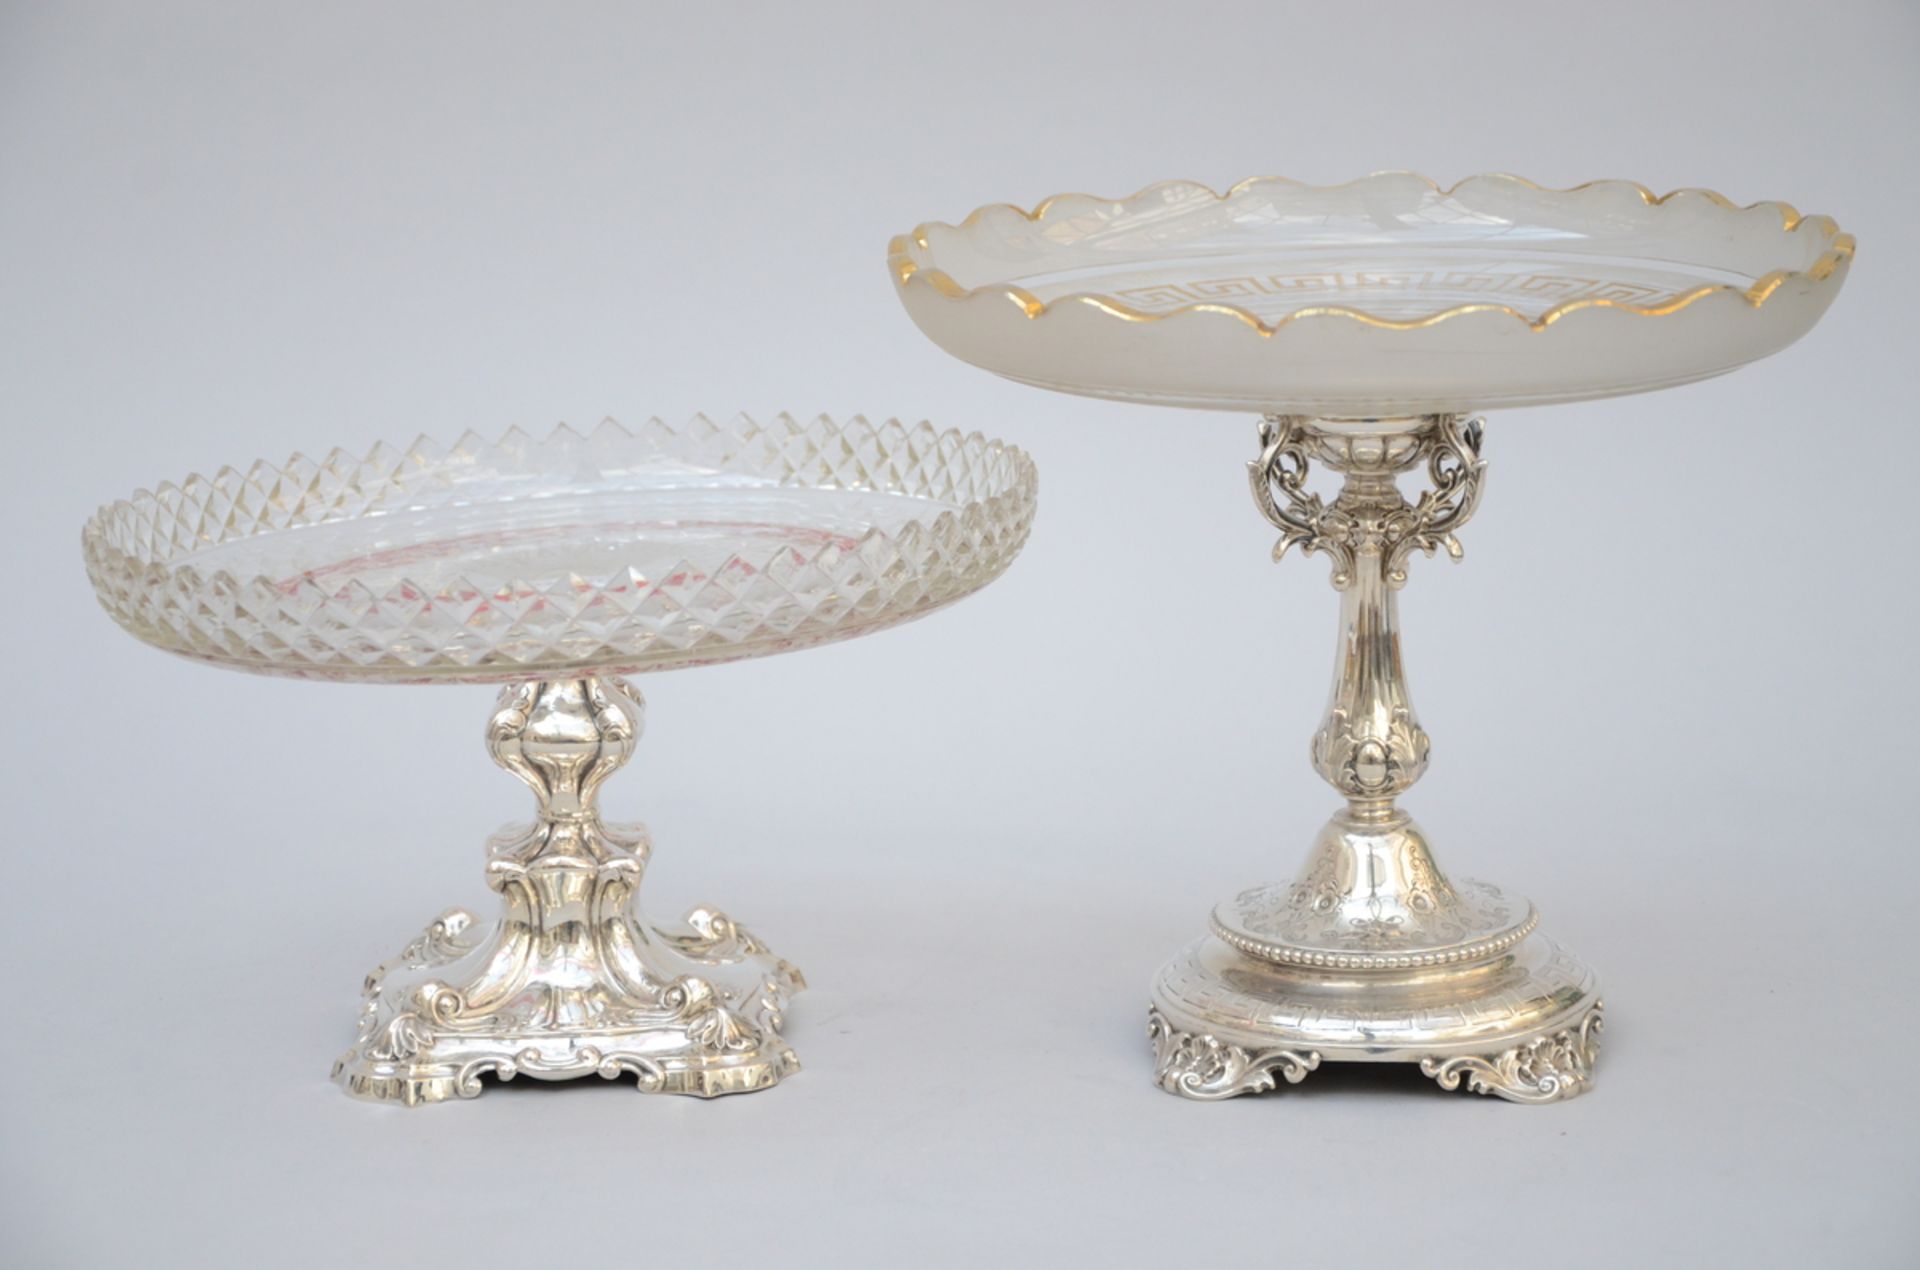 Two round crystal presenters on a silver base (15x26cm) (22x26cm)